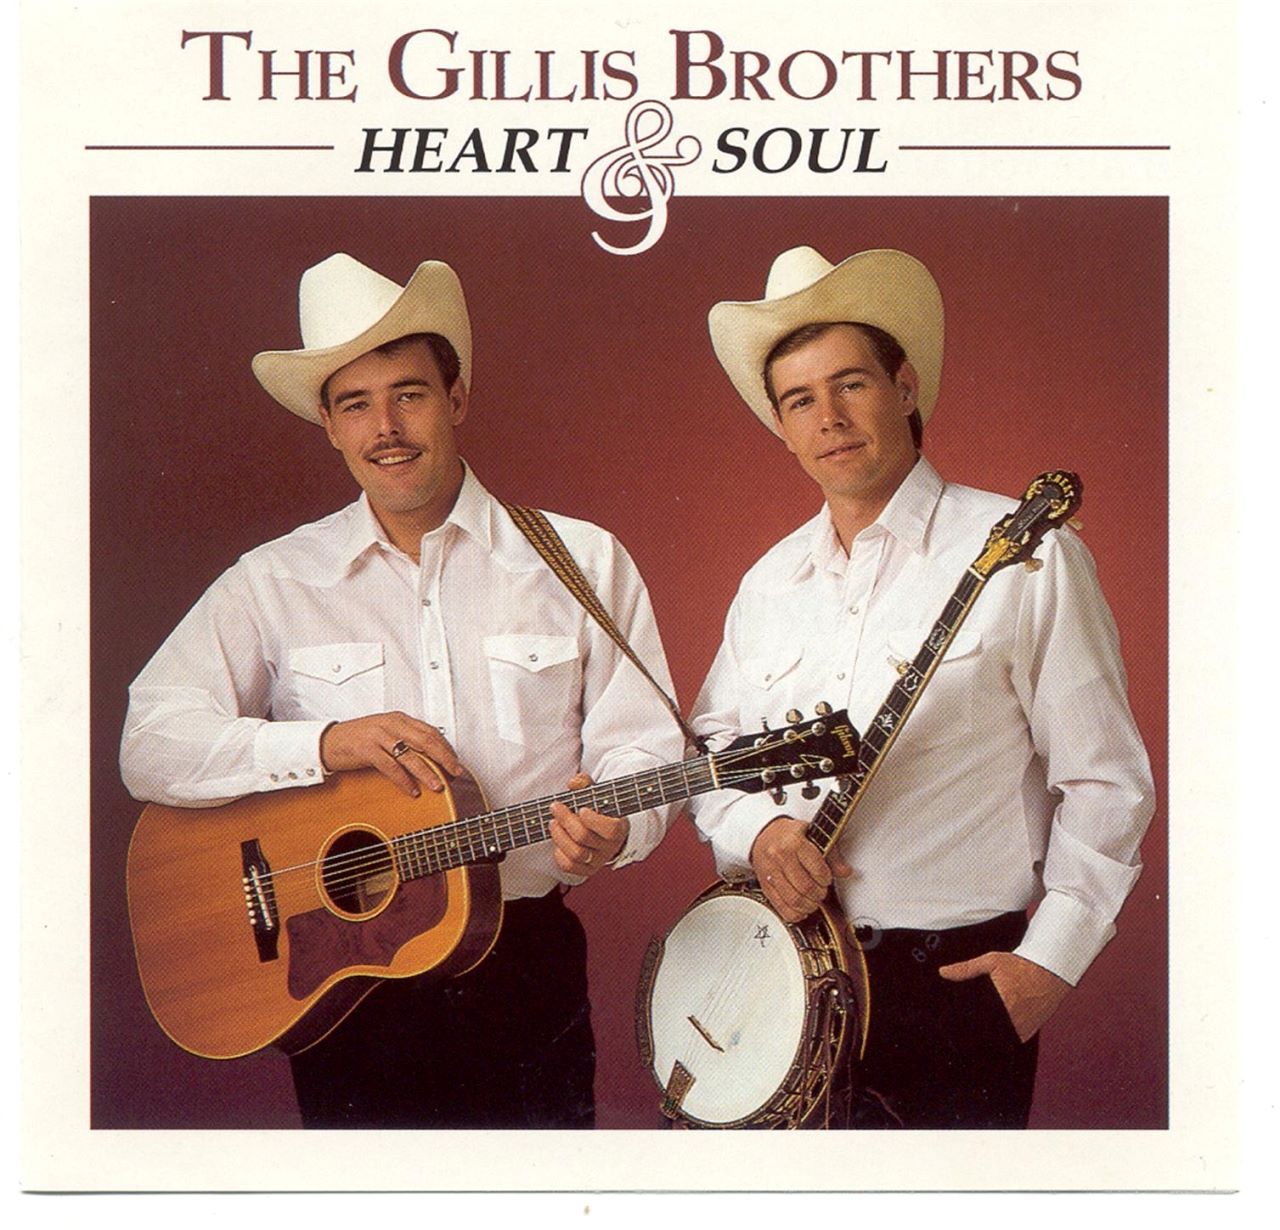 Gillis Brothers - Heart & Soul cover album